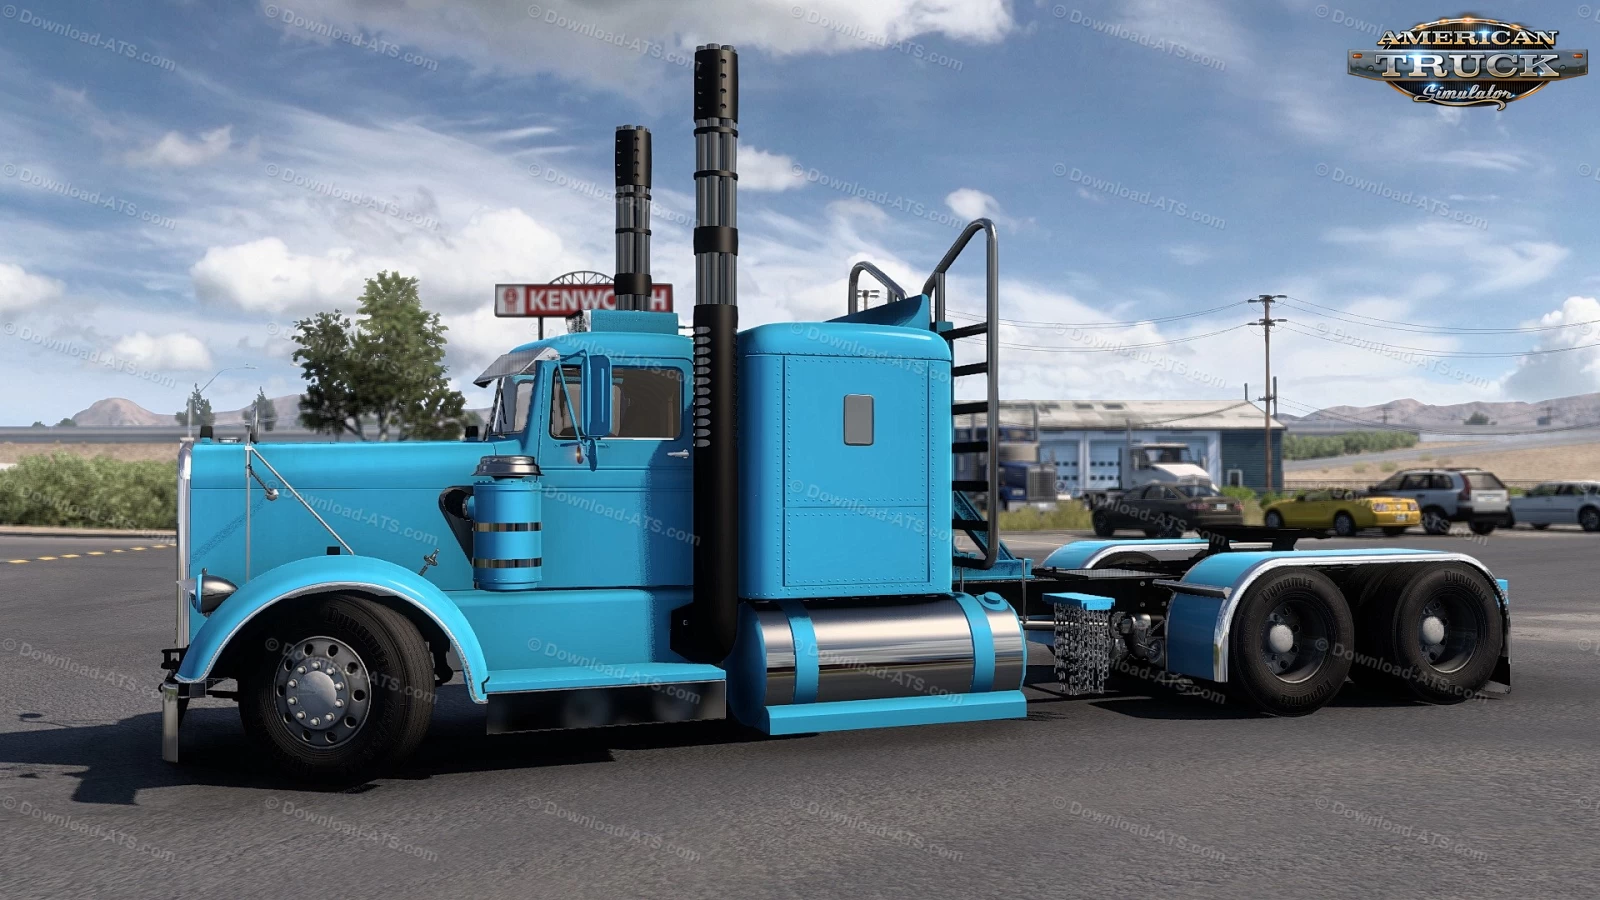 Kenworth 521 Custom v1.3 By ReneNate (1.46.x) for ATS